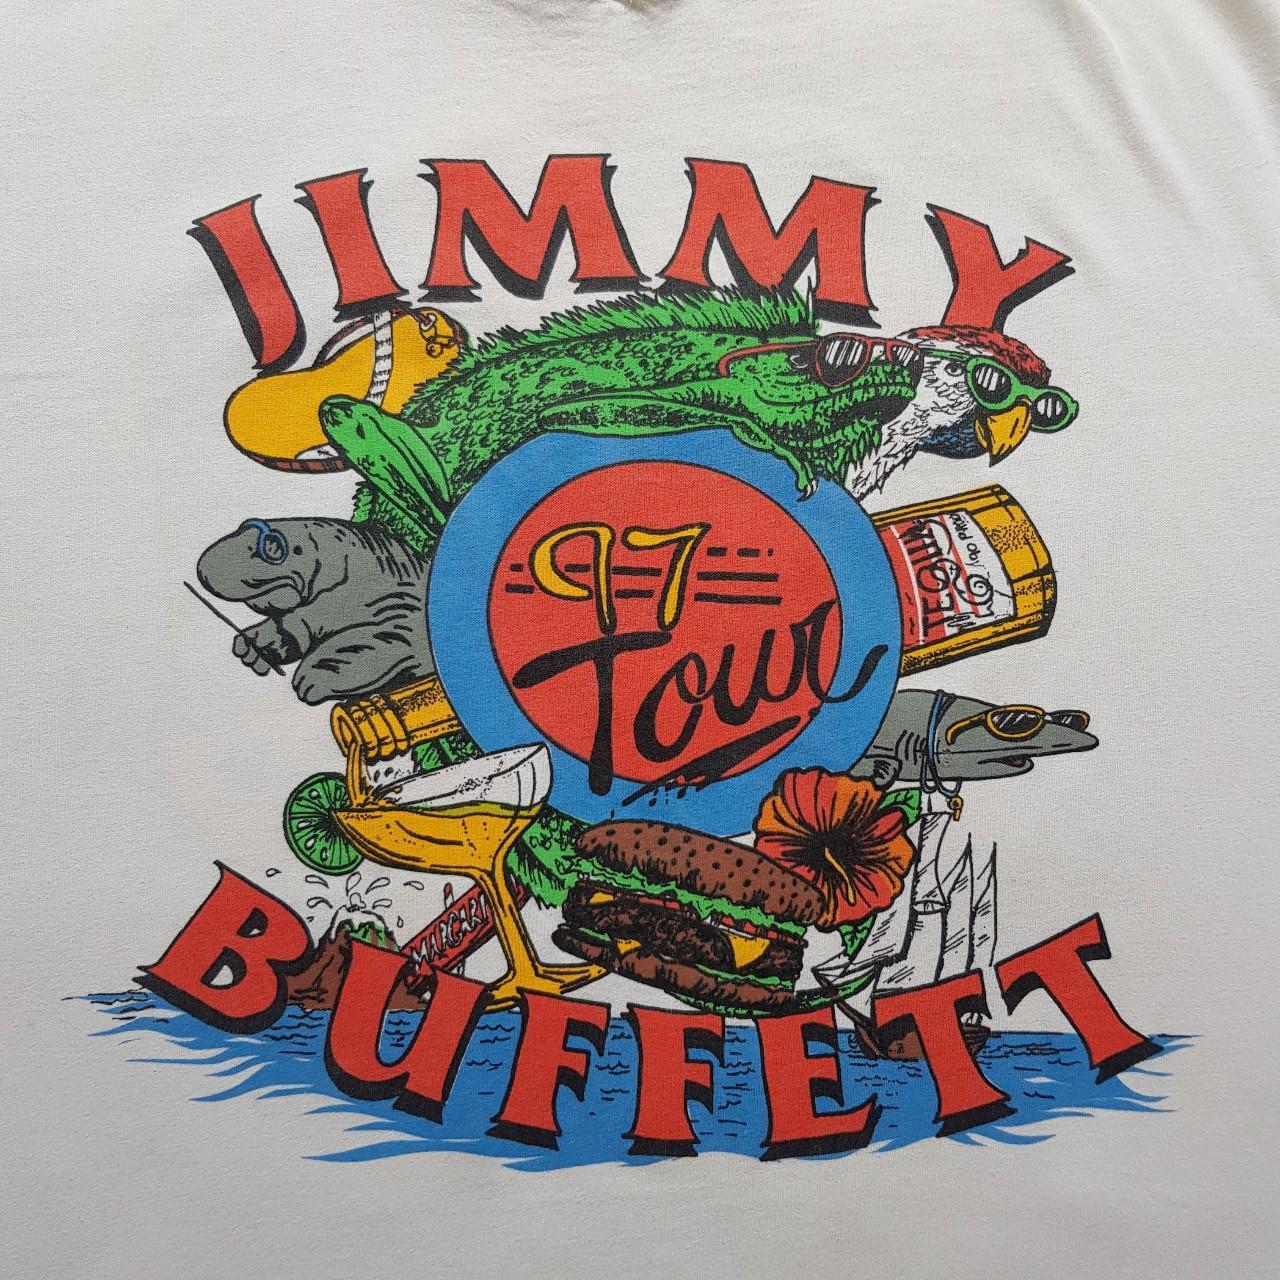 90s fruit of the loom jimmy buffet tour tshirt